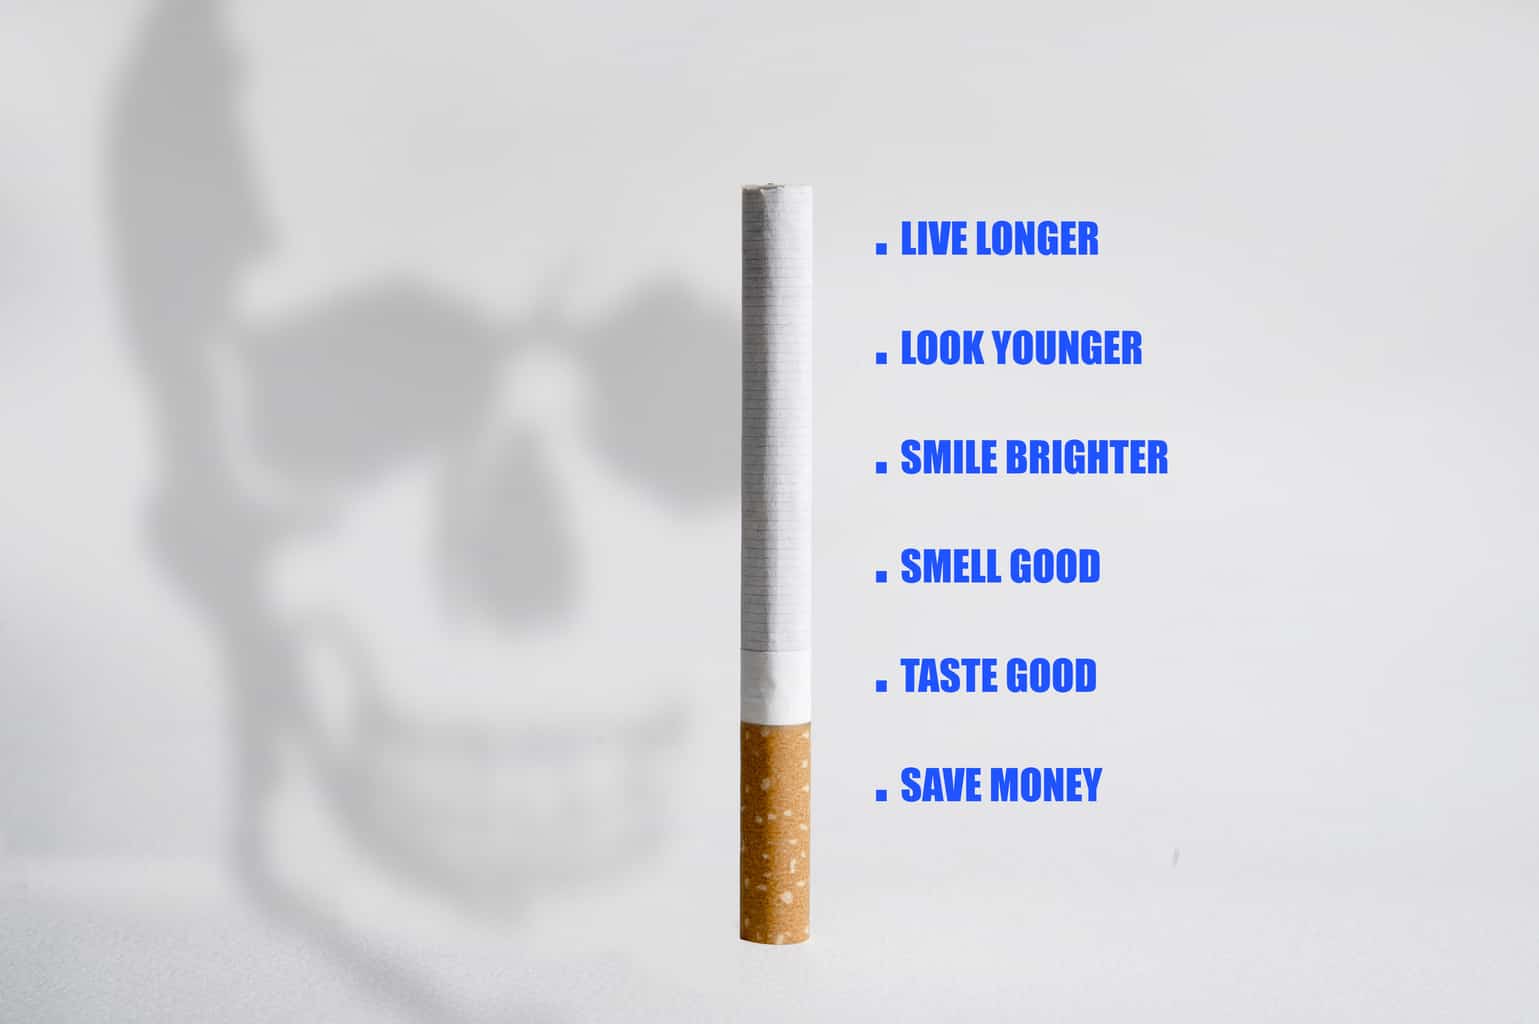 Secret benefits of smoking? (the government hides)